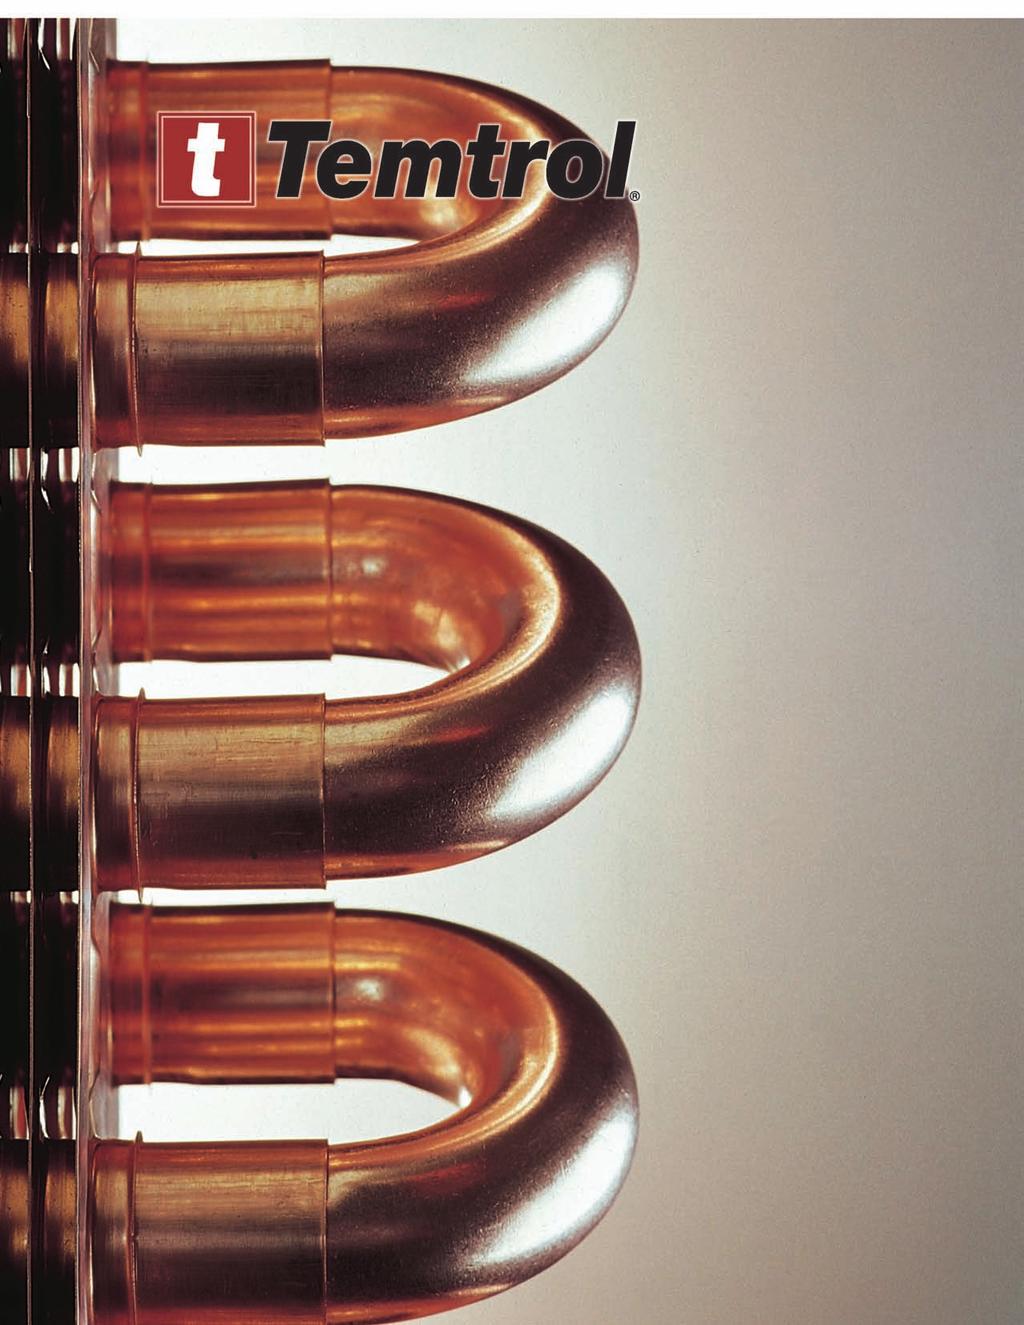 Temtrol Manufacturing OEM & Replacement Coils Since 1955 Coils Designed to Fit Your Requirements Chilled & Hot Water Direct Expansion Steam Distributing Condenser Standard Steam Quick Ship Program